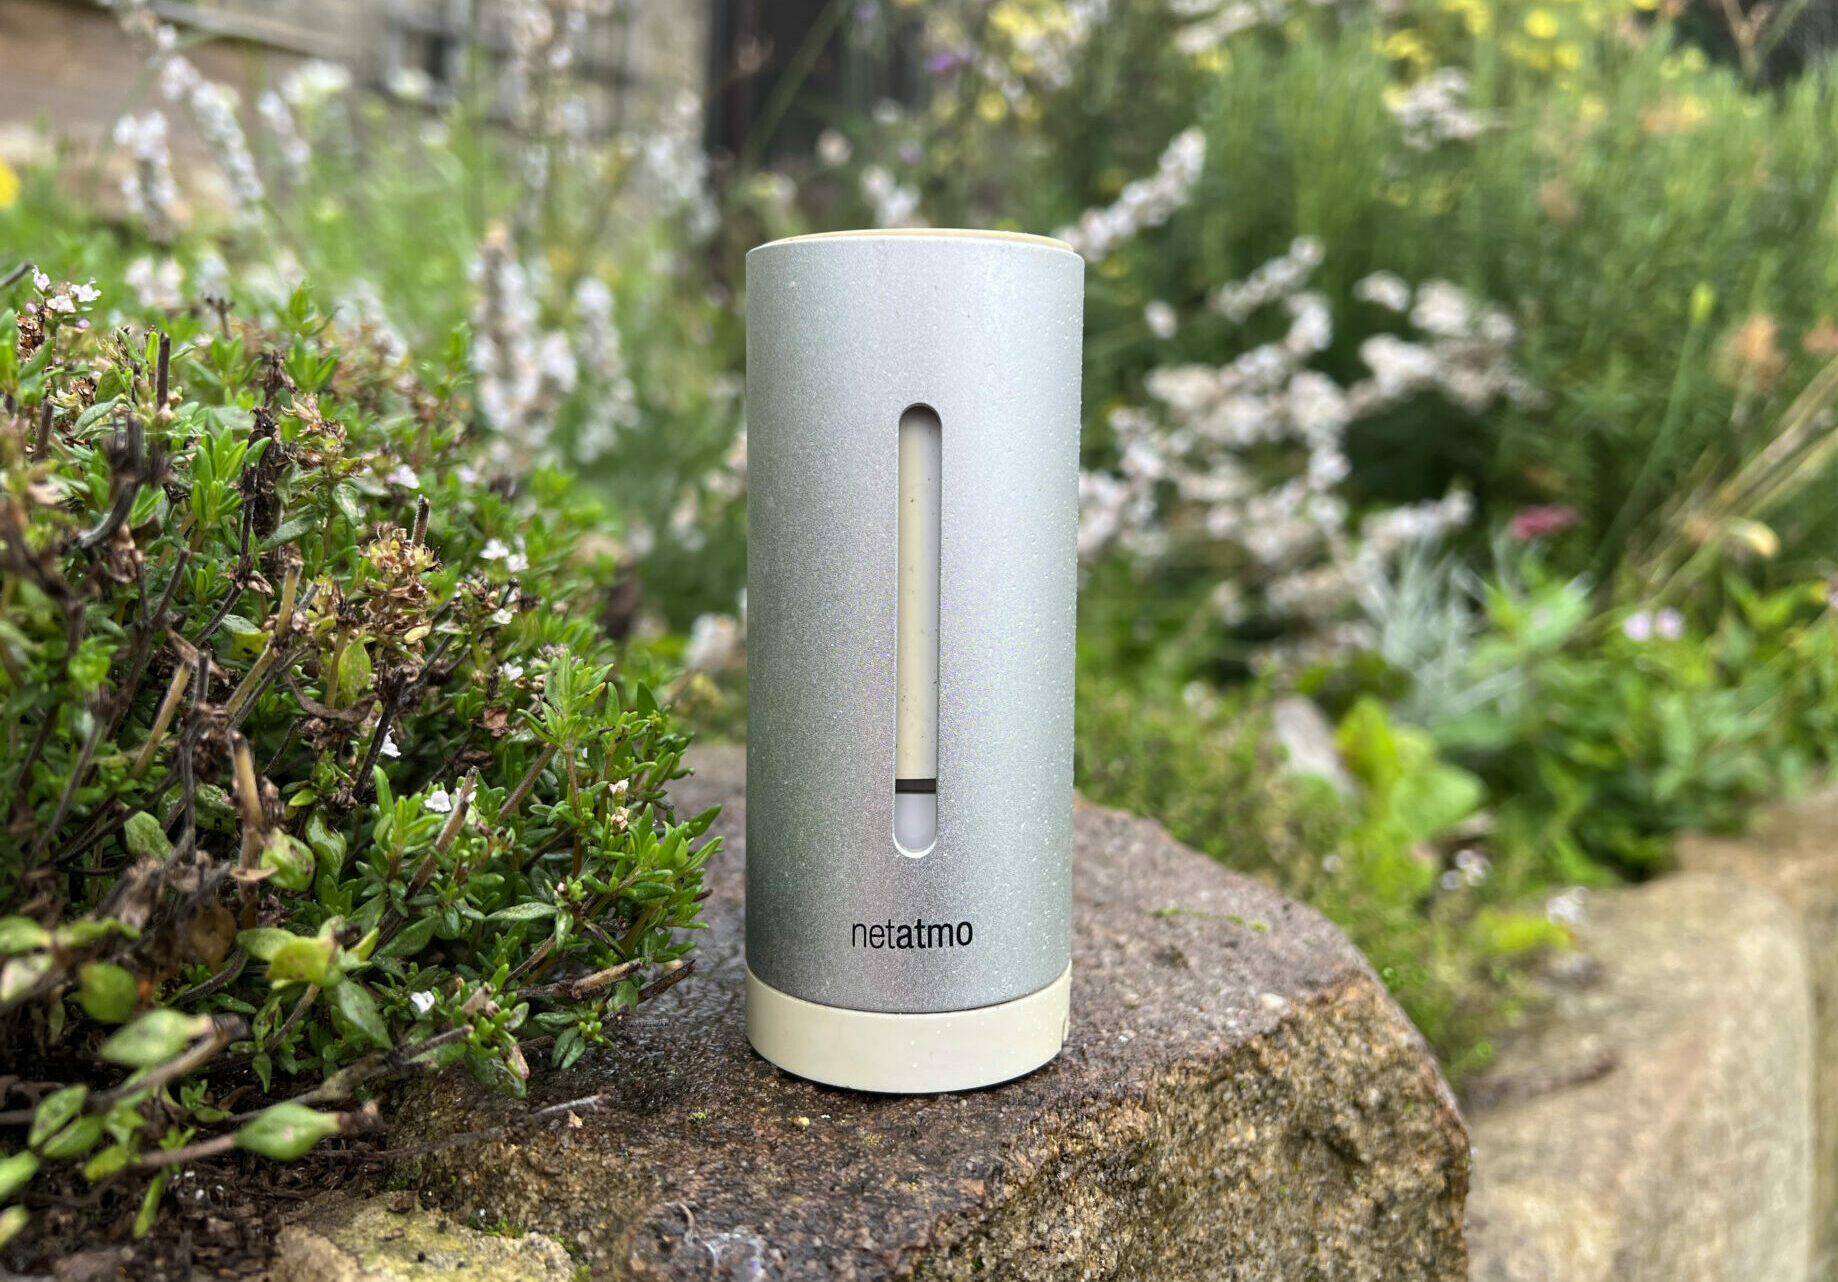 Access your own weather data on your smartphone – the Netatmo